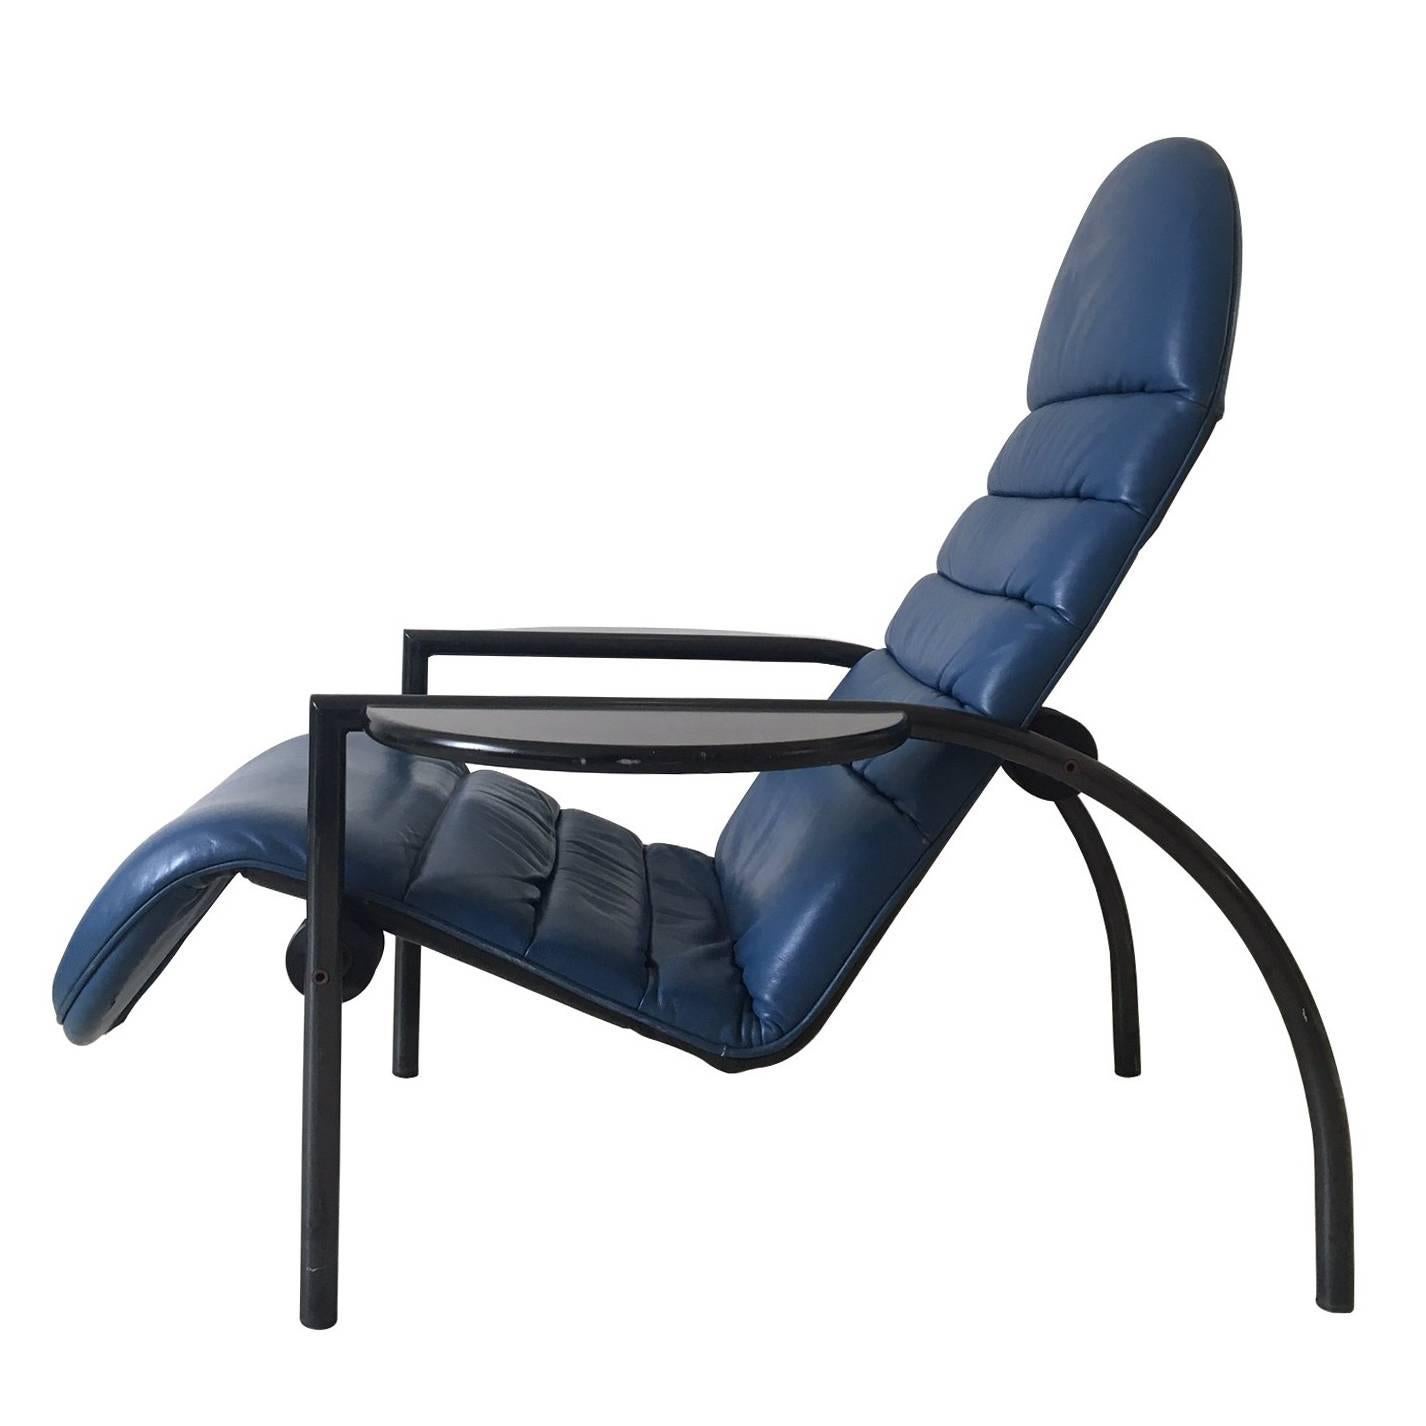 Extreme Rare Adjustable Lounge Chair by Ammanati and Vitelli for Moroso, 1980s For Sale